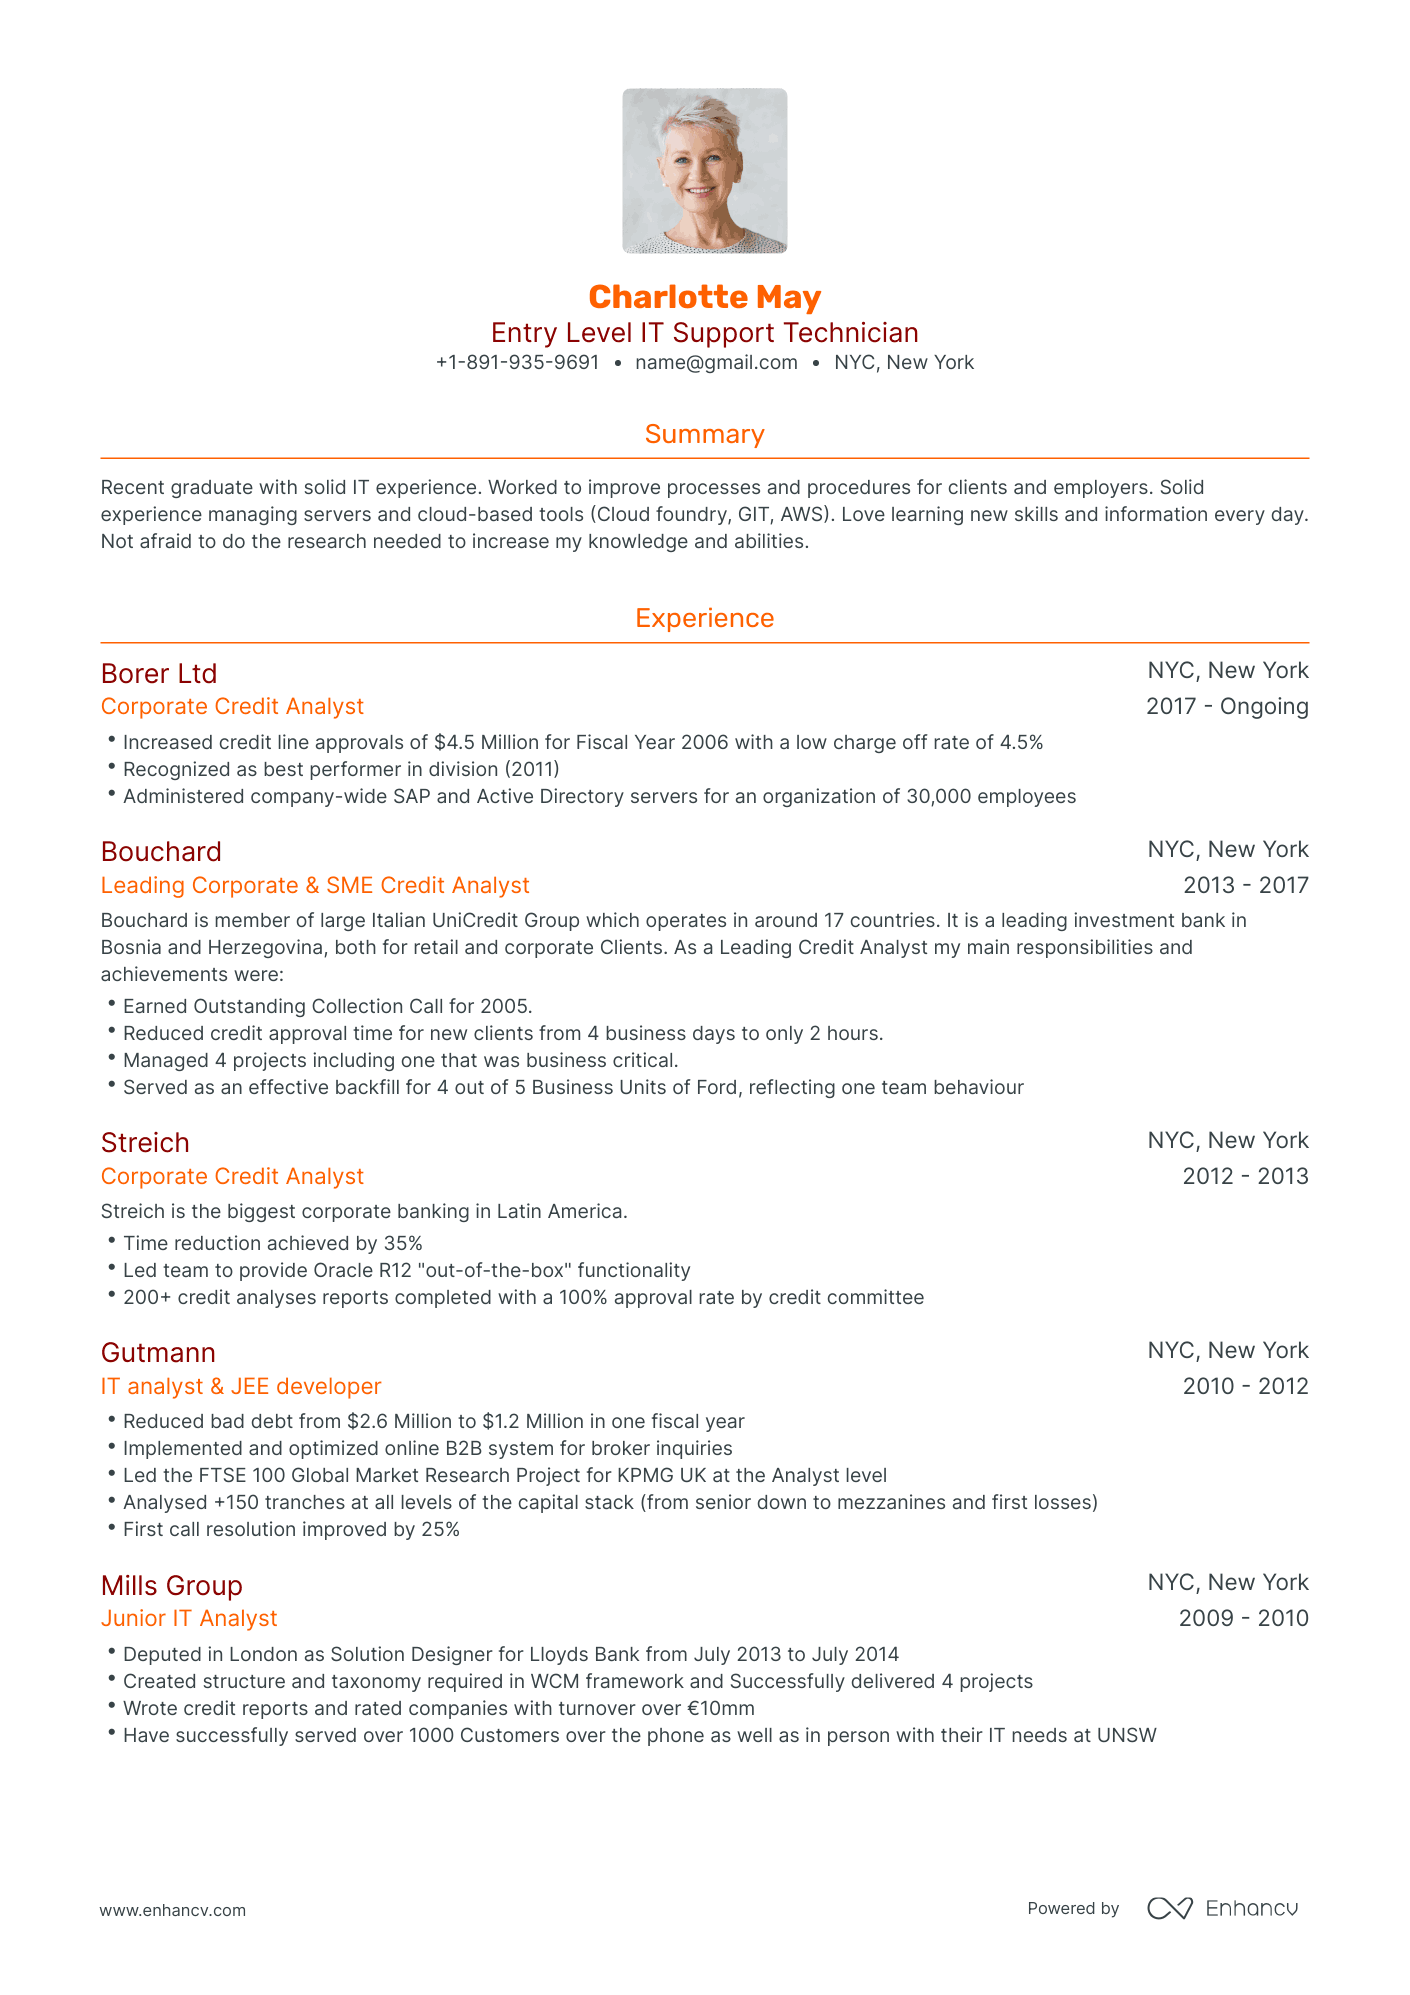 Traditional Entry Level IT Resume Template